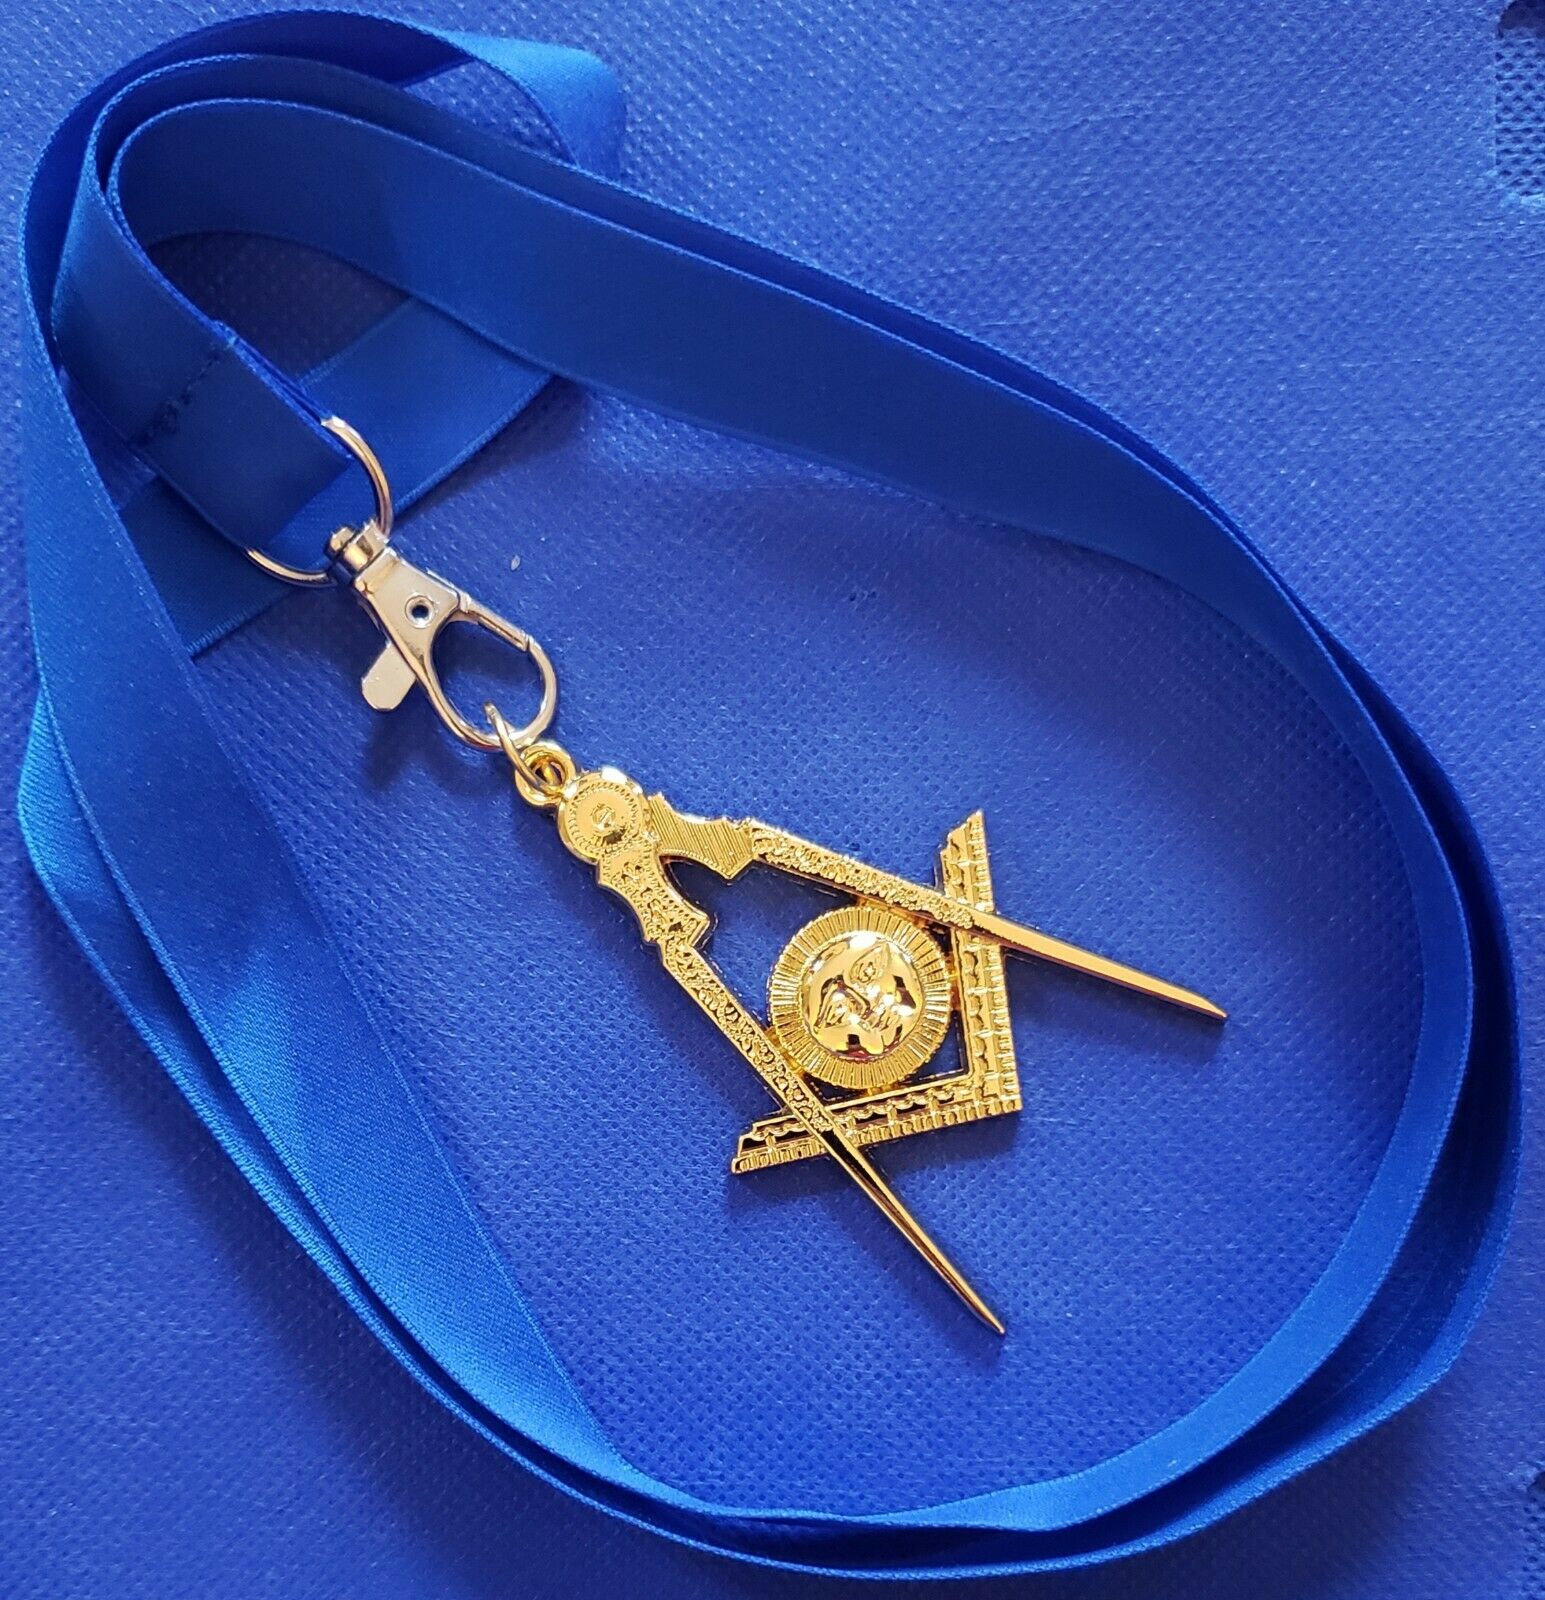 Masonic Collar Gold Plated Jewel Senior Deacon With Blue Neck Strap By Deura Usa